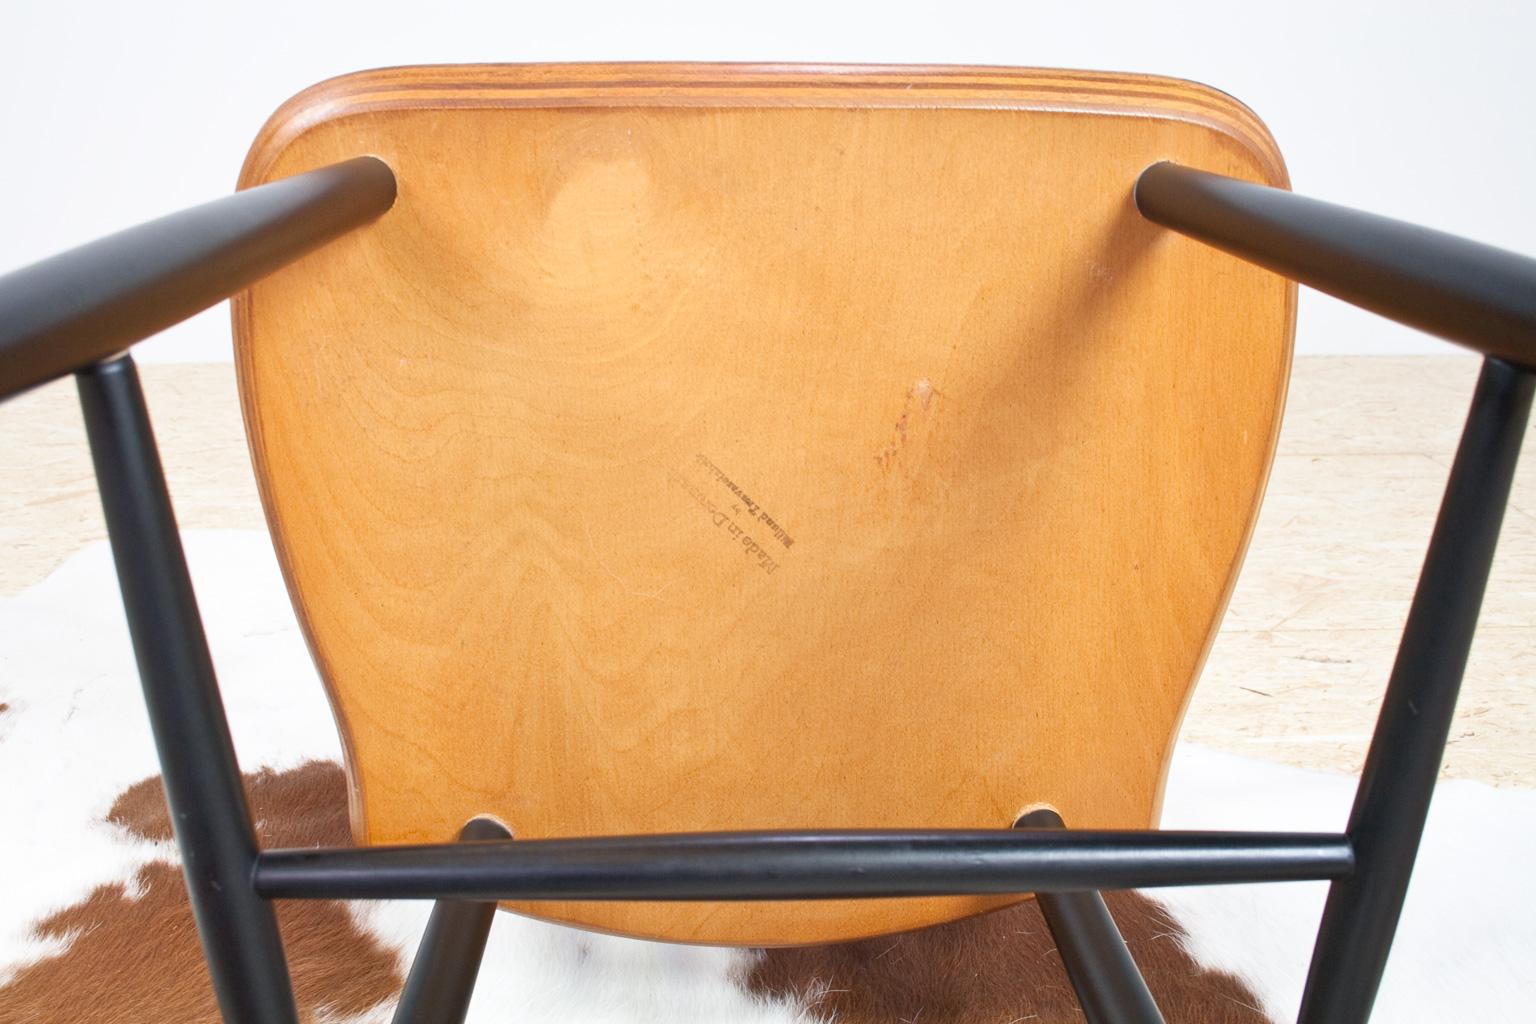 Black and Brown Wooden Spindle Chair by Billund, 1960s Scandinavian Modern For Sale 3